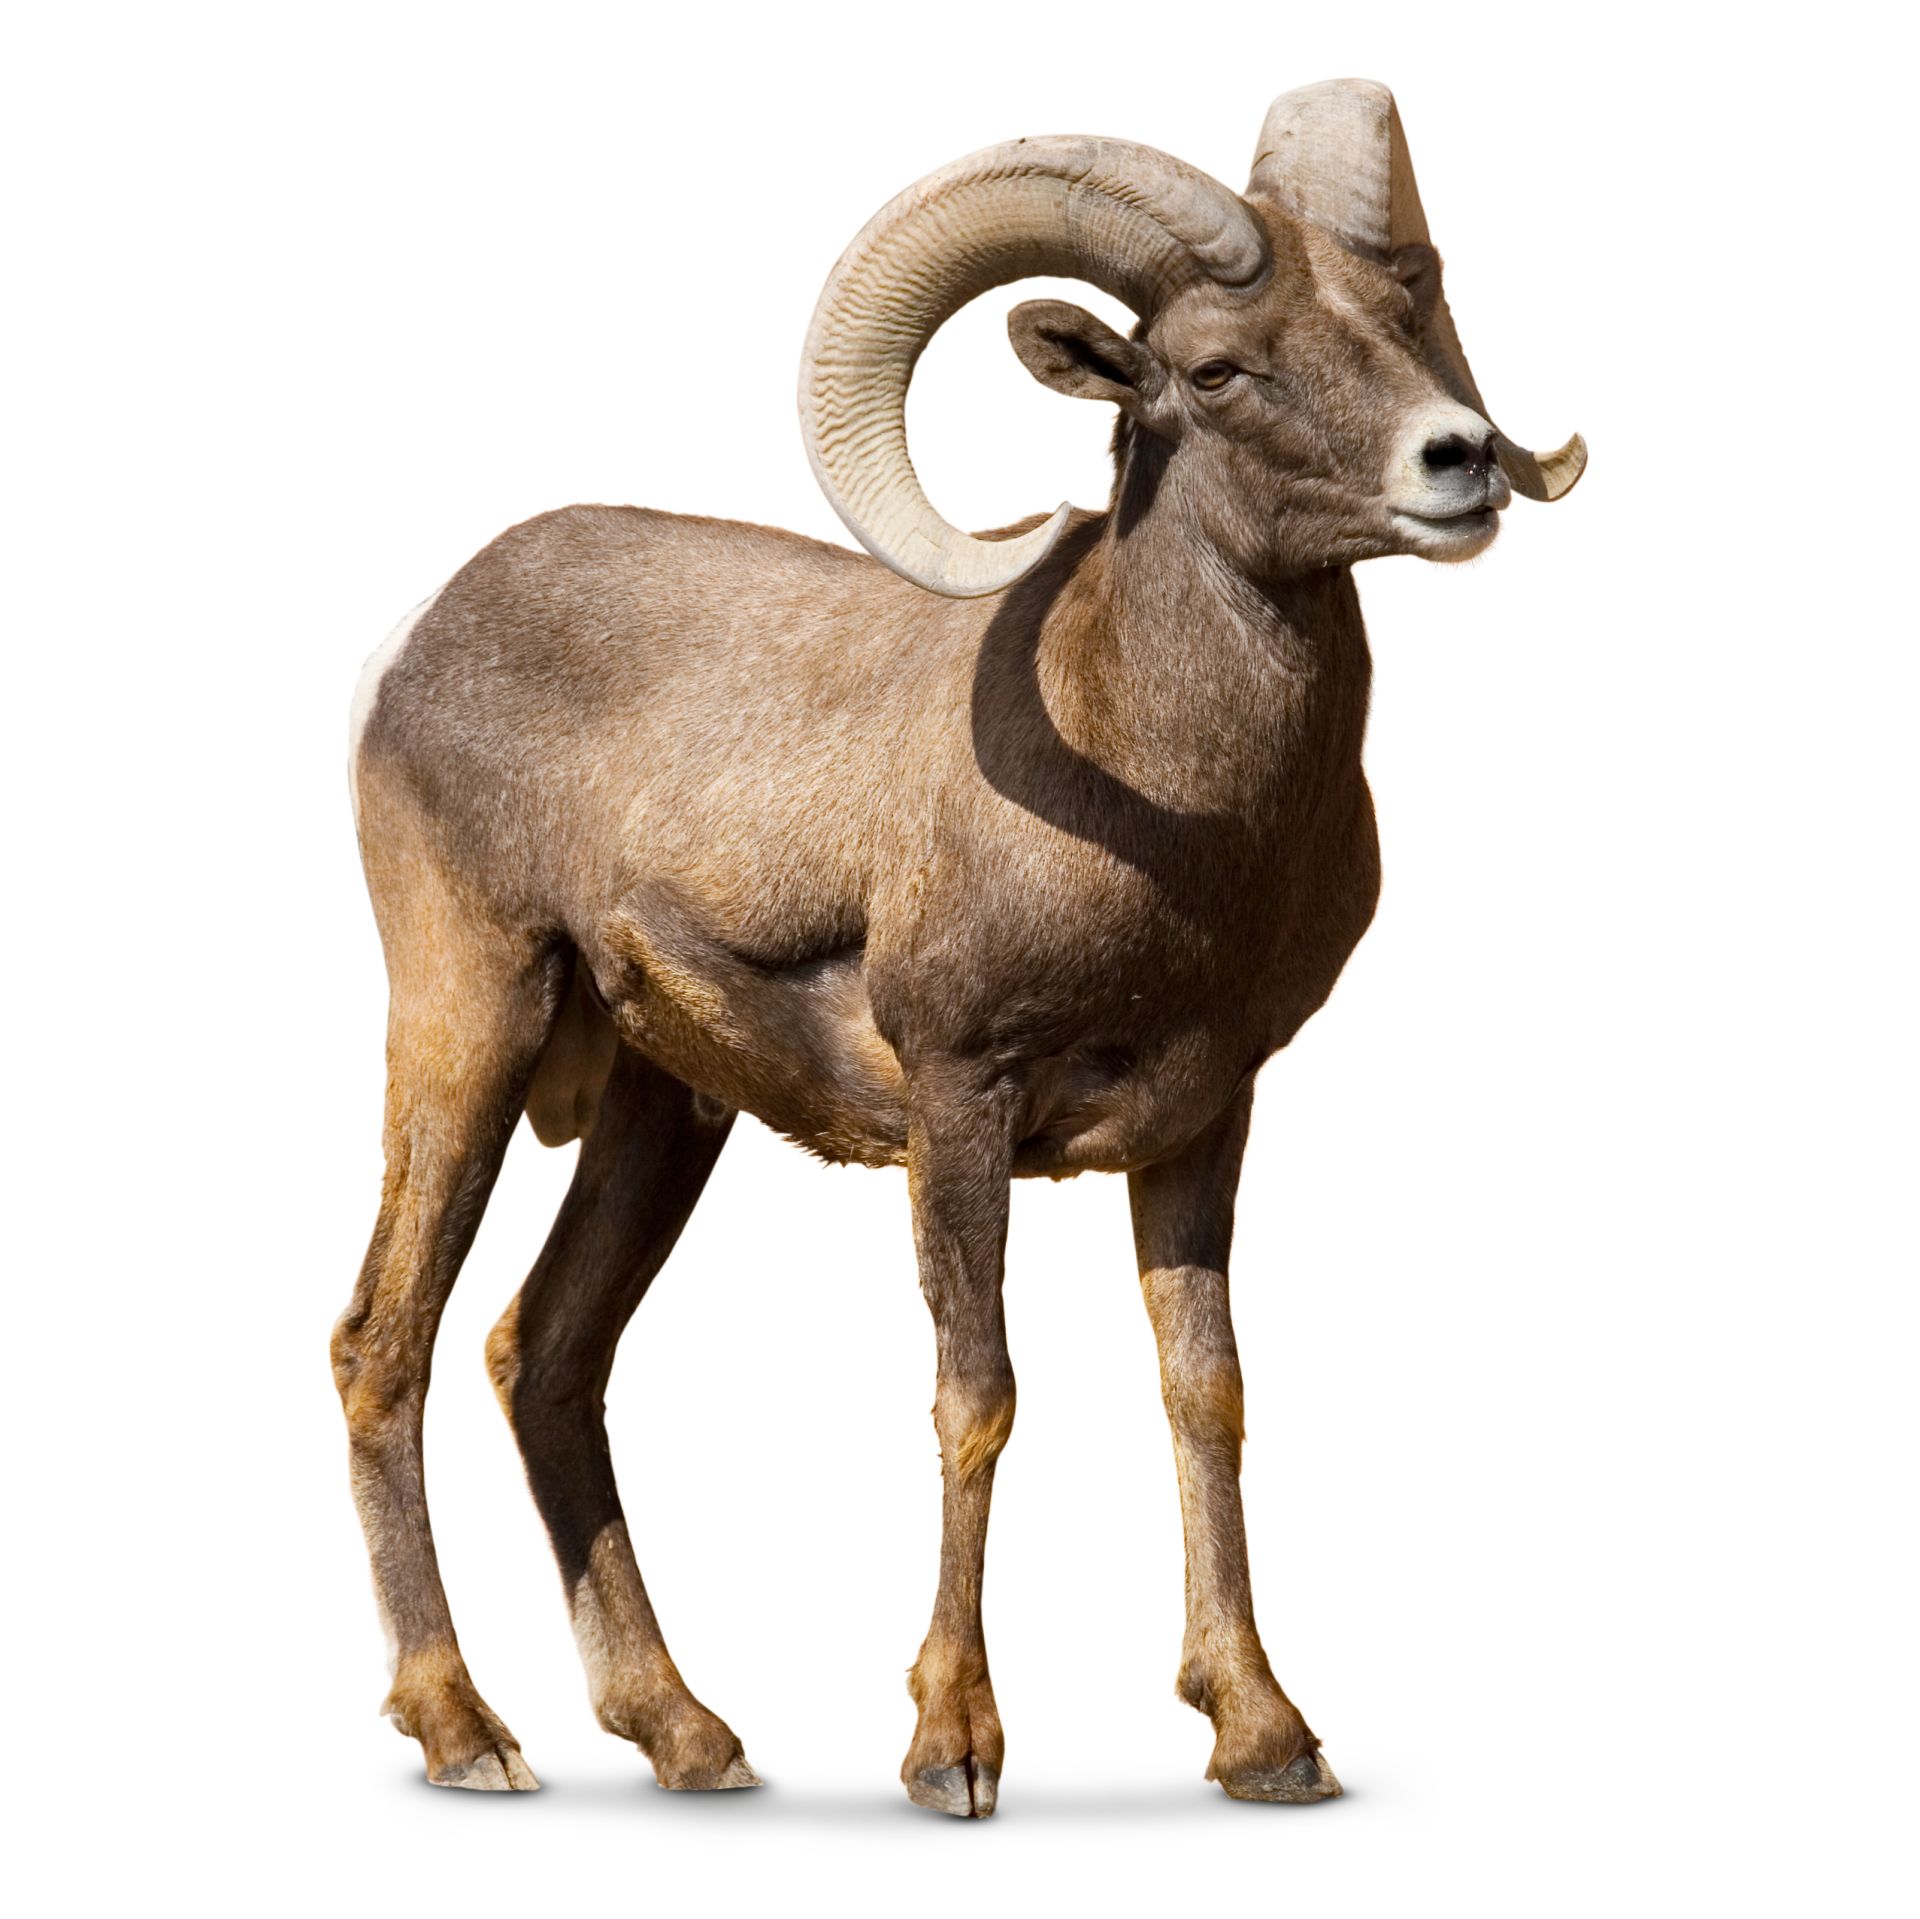 Bighorn Sheep Facts | Bighorn Sheep For Kids | DK Find Out